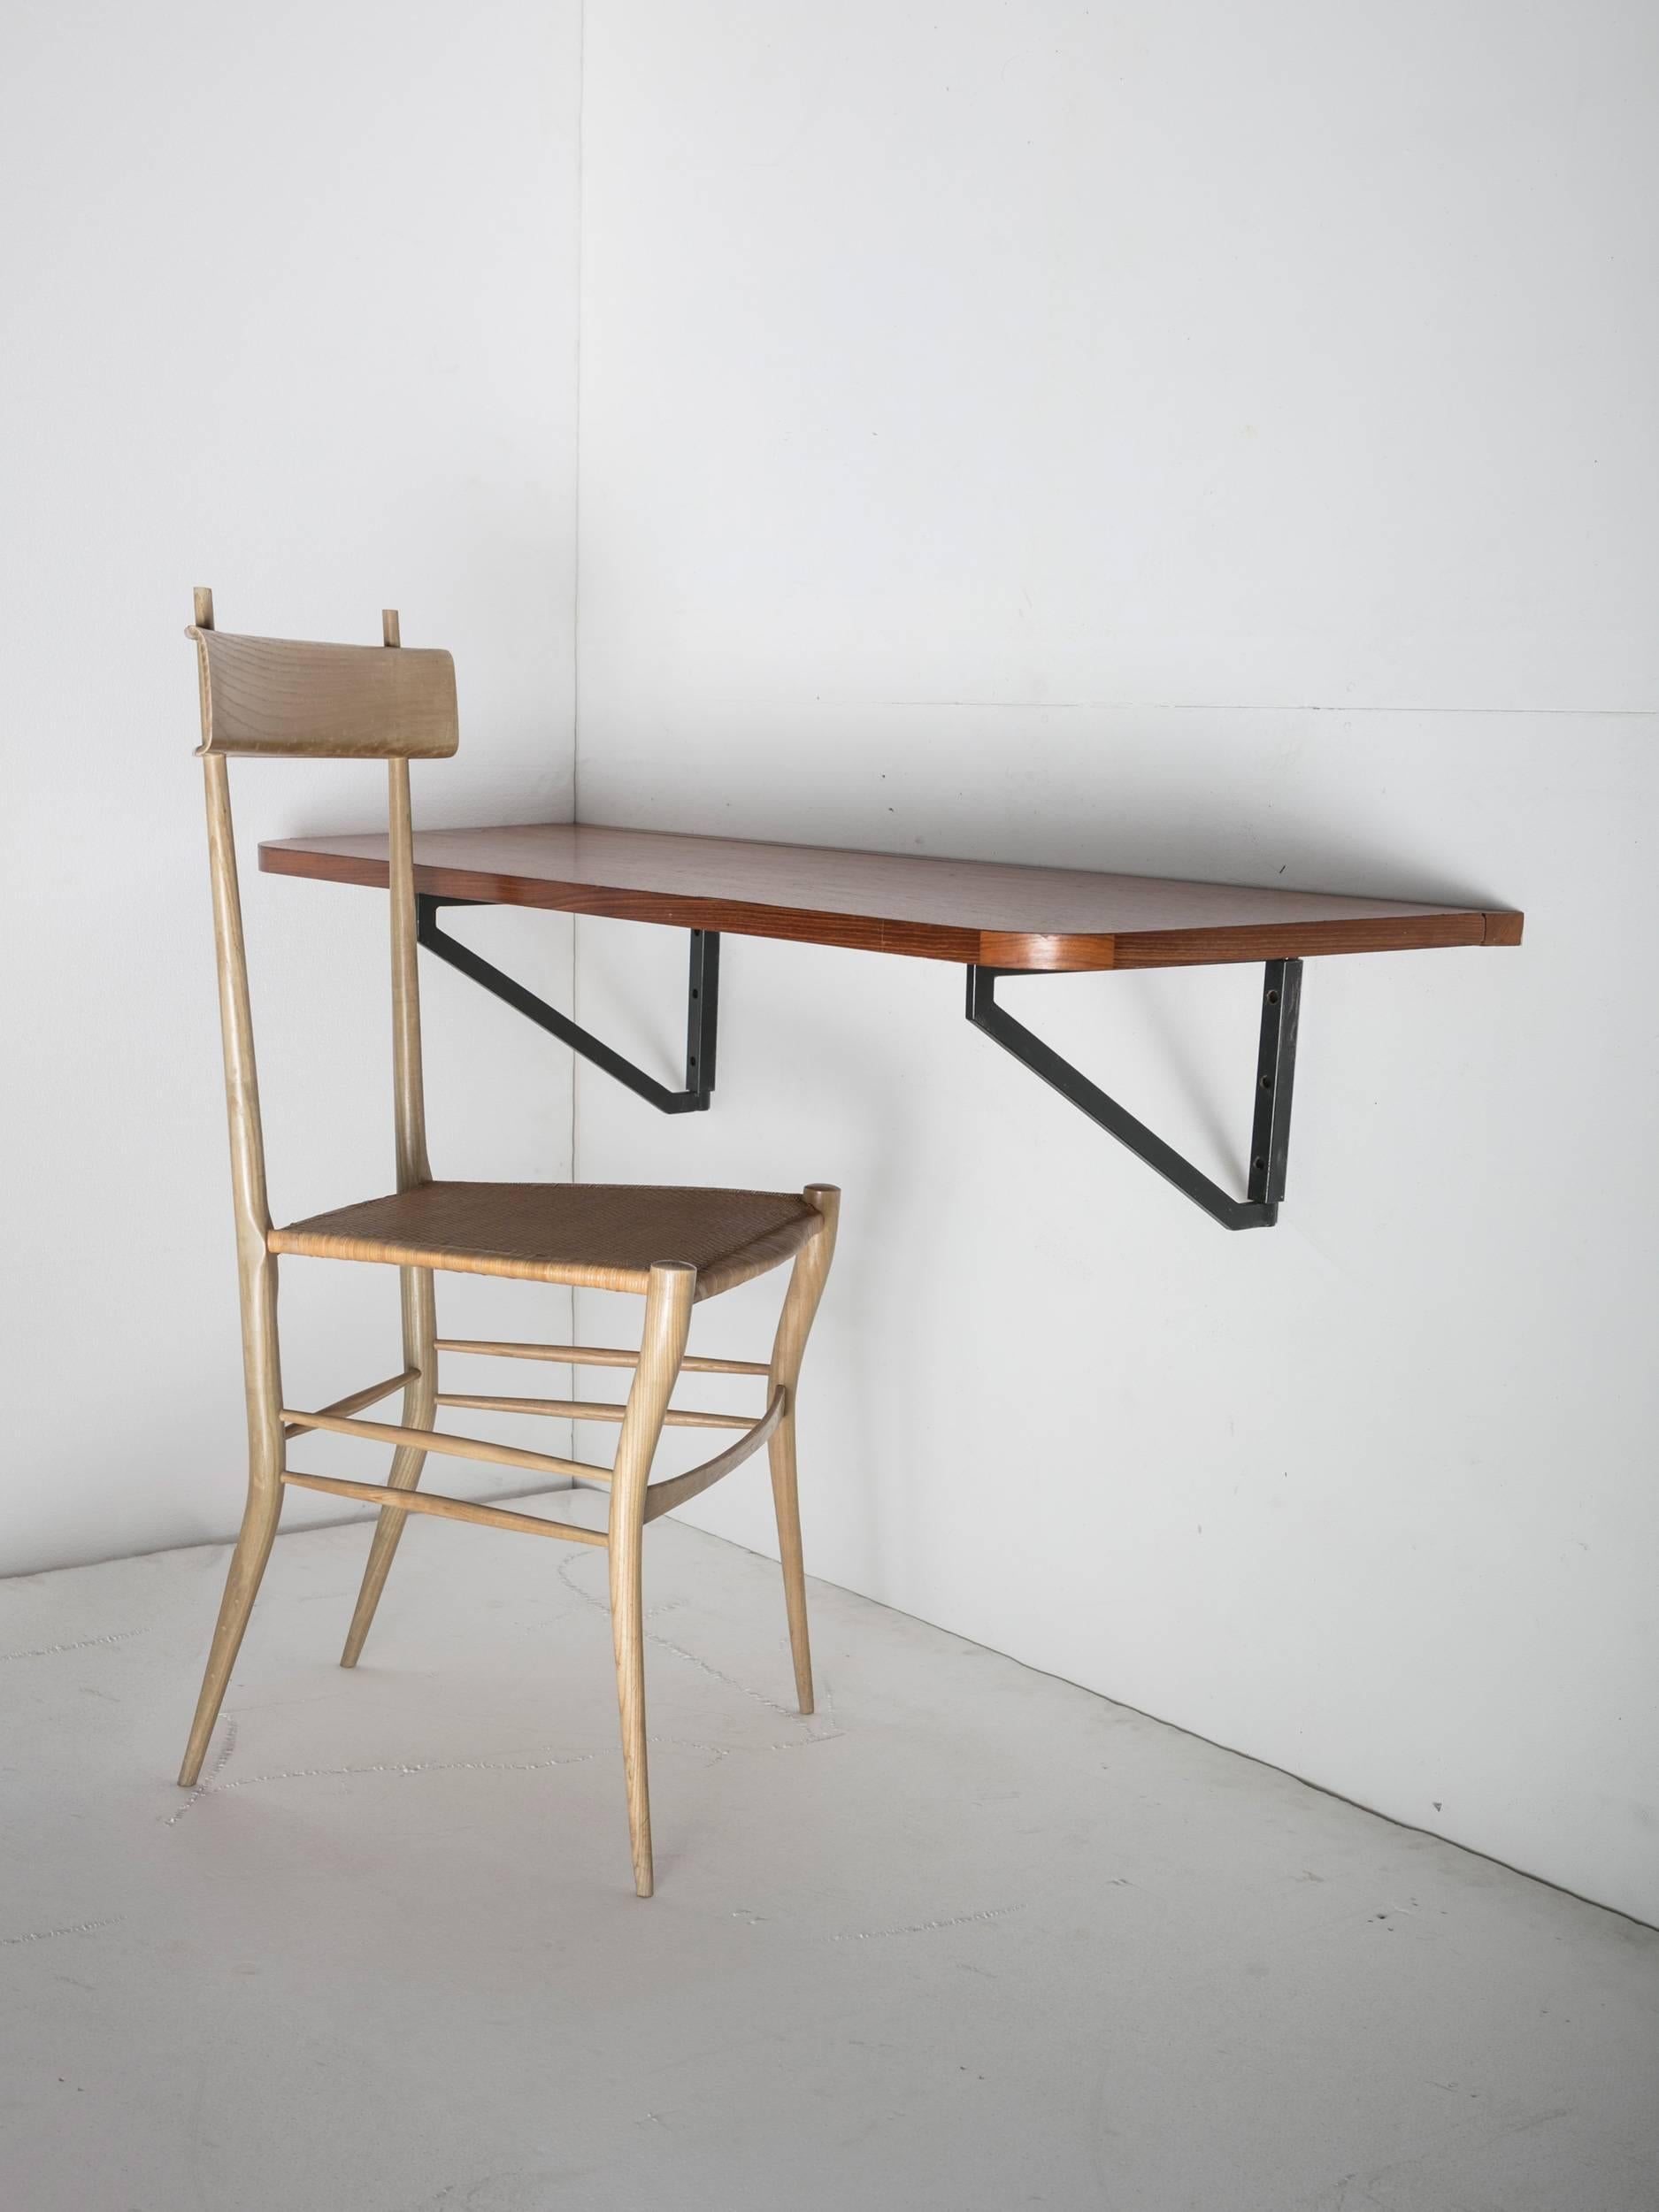 Plywood folding wall desk.
Piece can be used for transit areas or rooms with multiple purposes.
Top is supported by two rotating metal brackets.